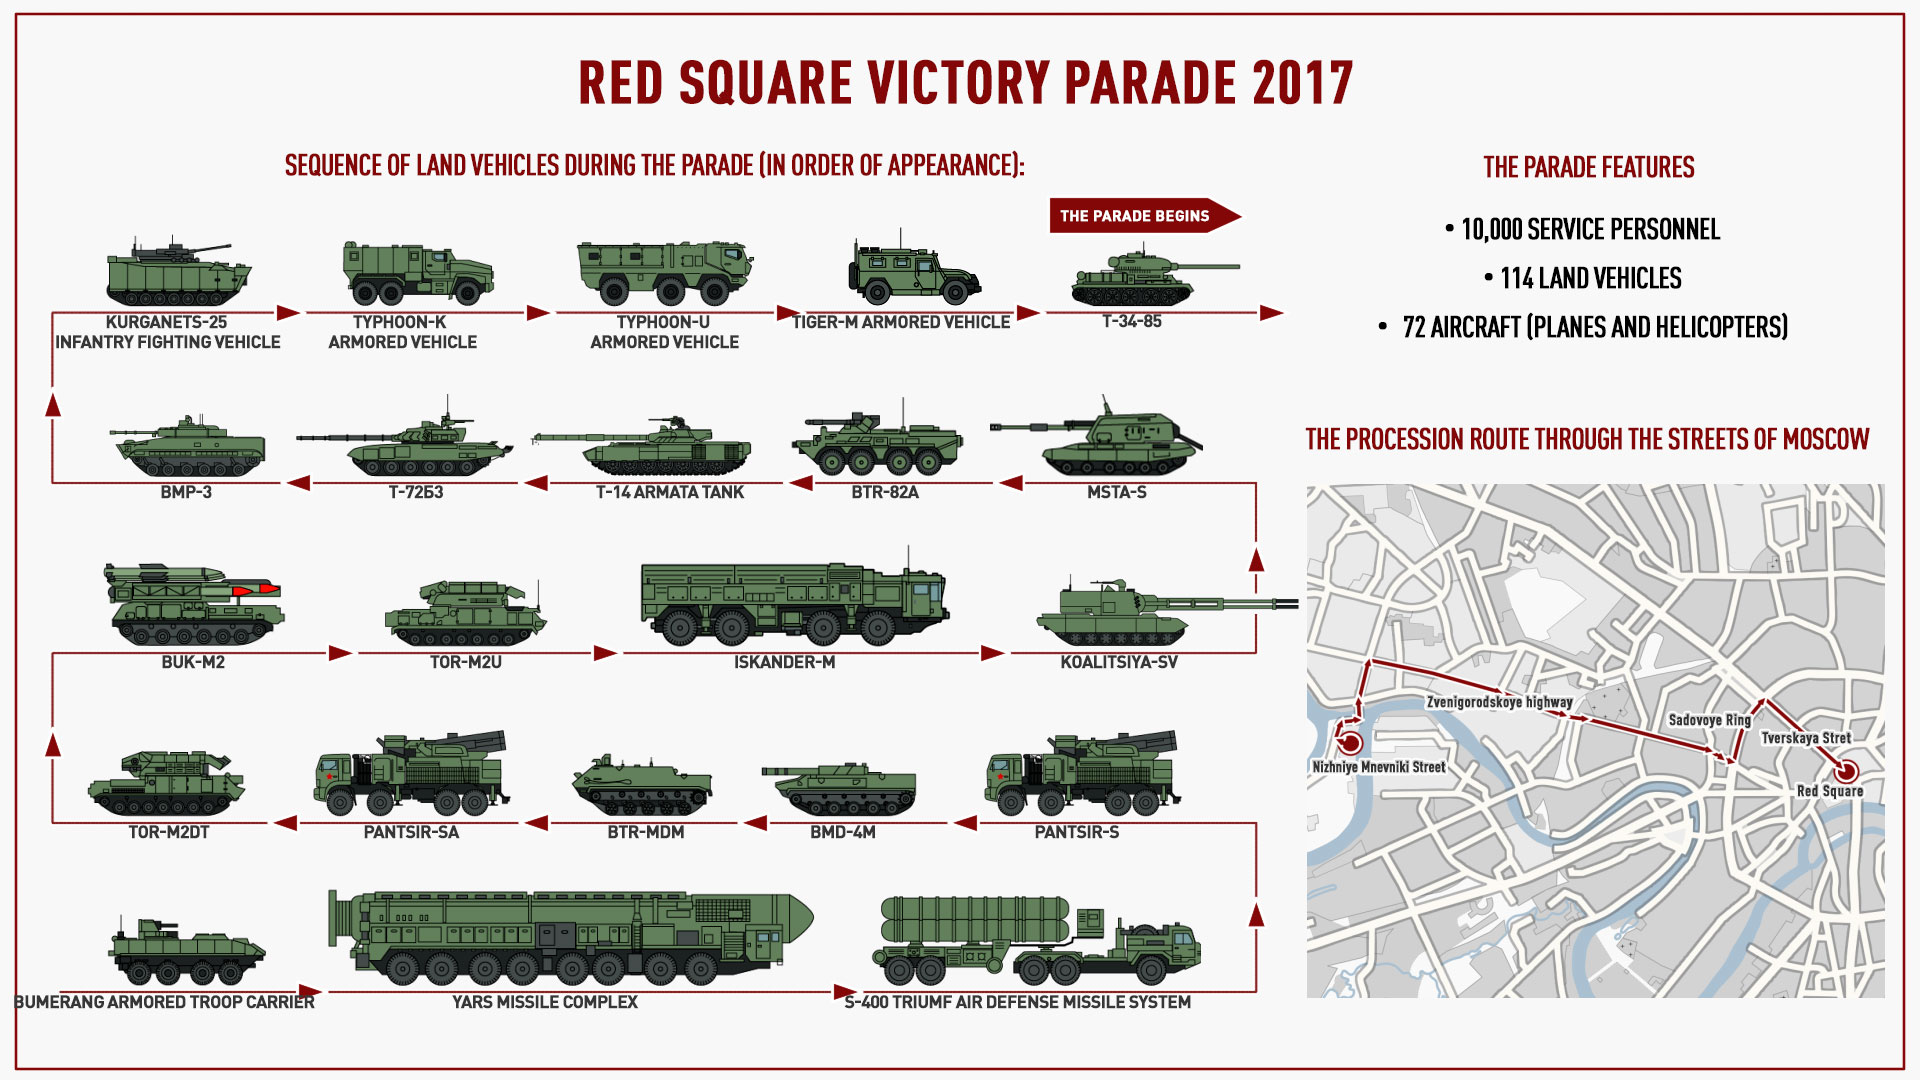 What vehicles will be on view during the May 9 parade?